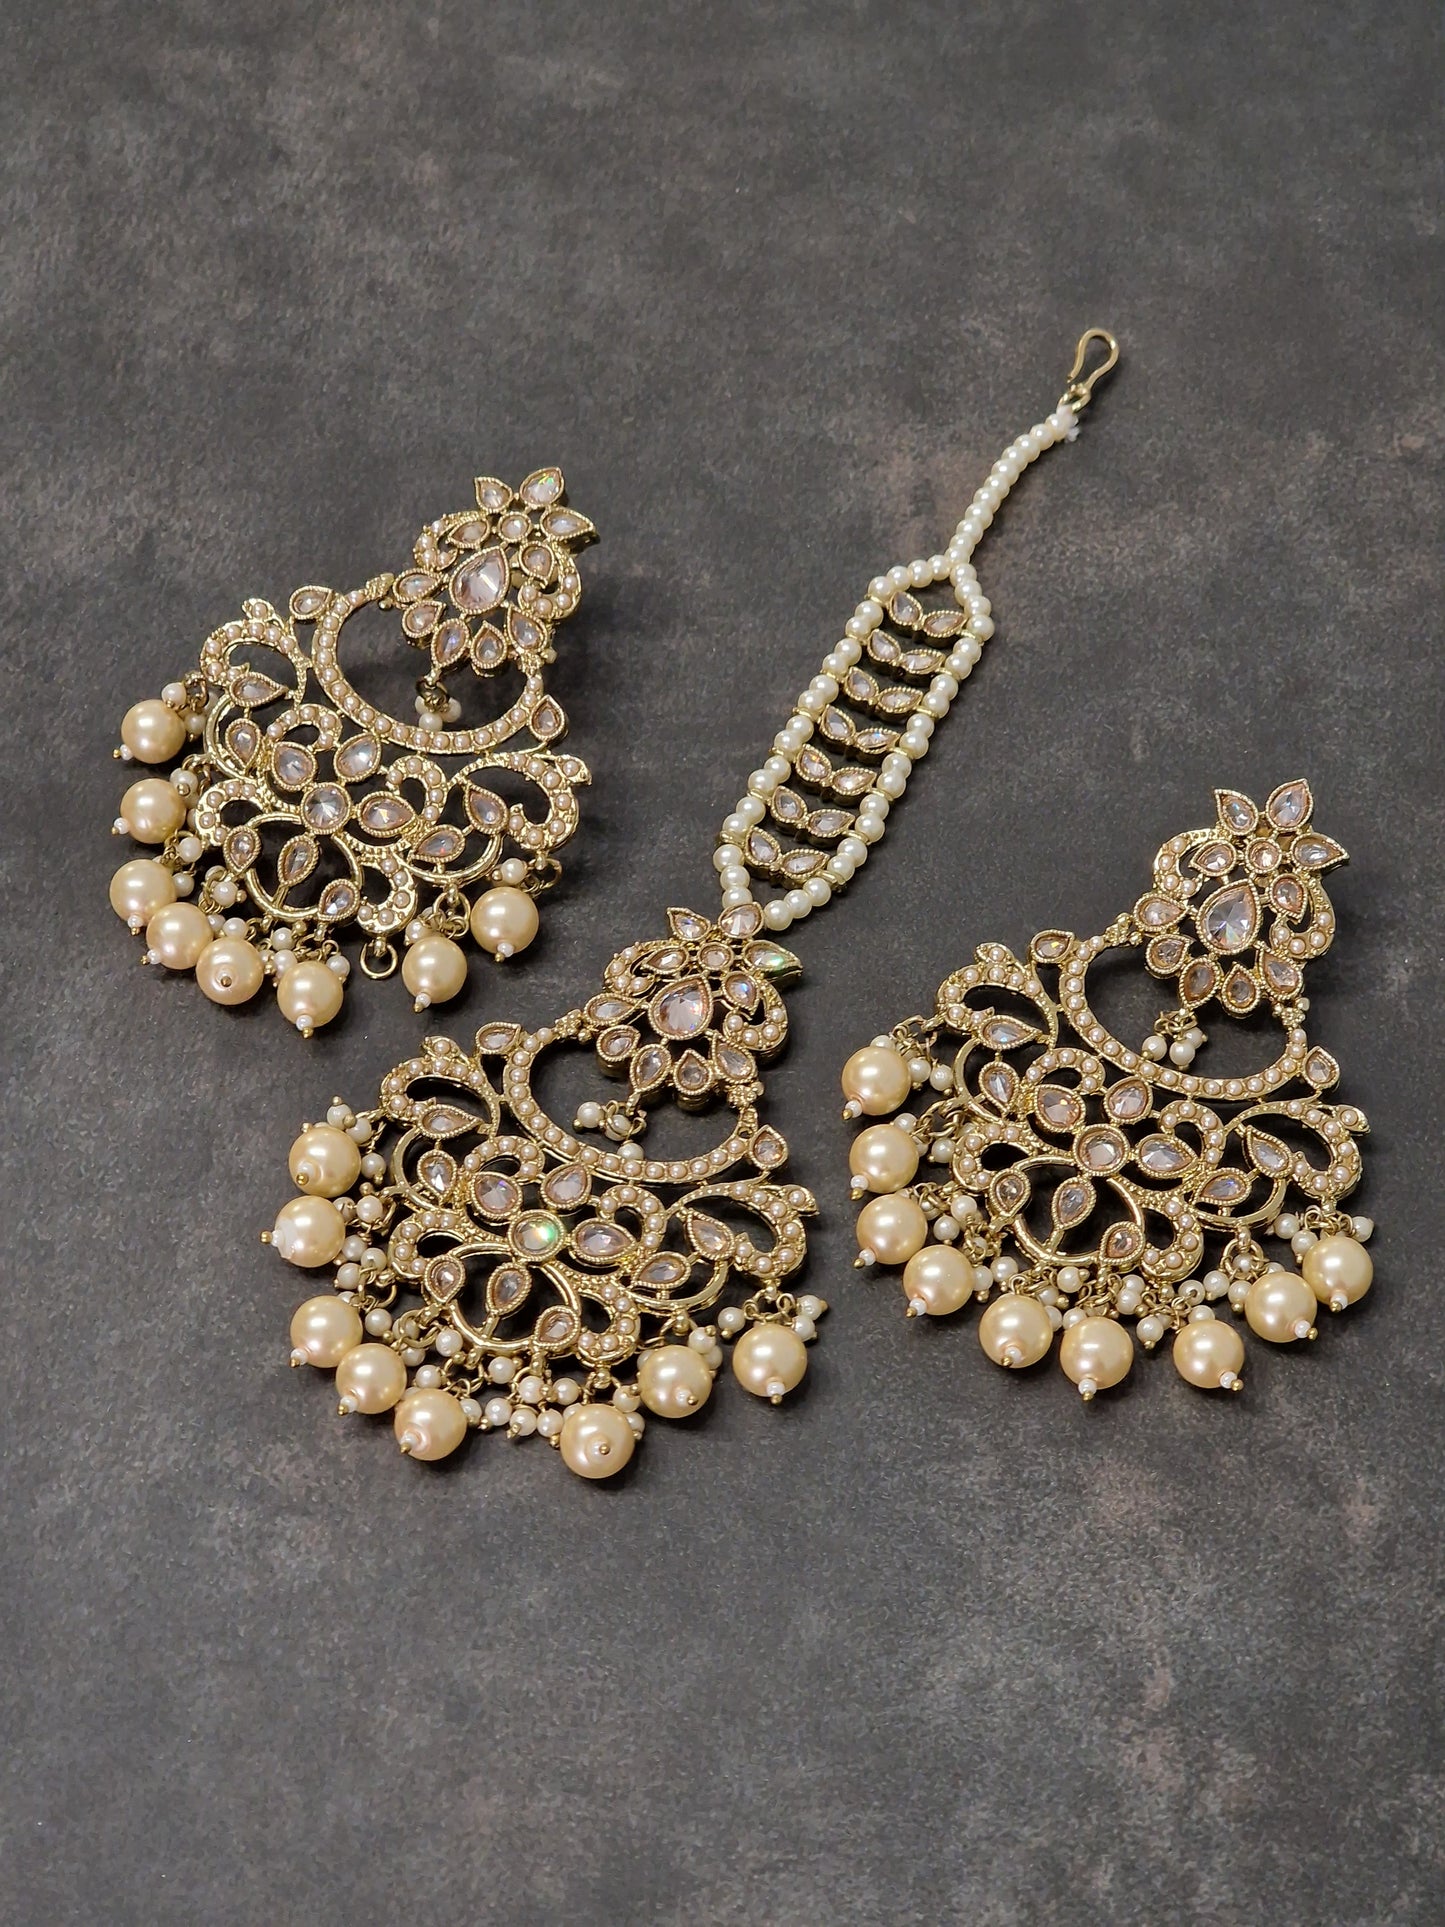 Statement Earing & Tikka Set - Available in various colours